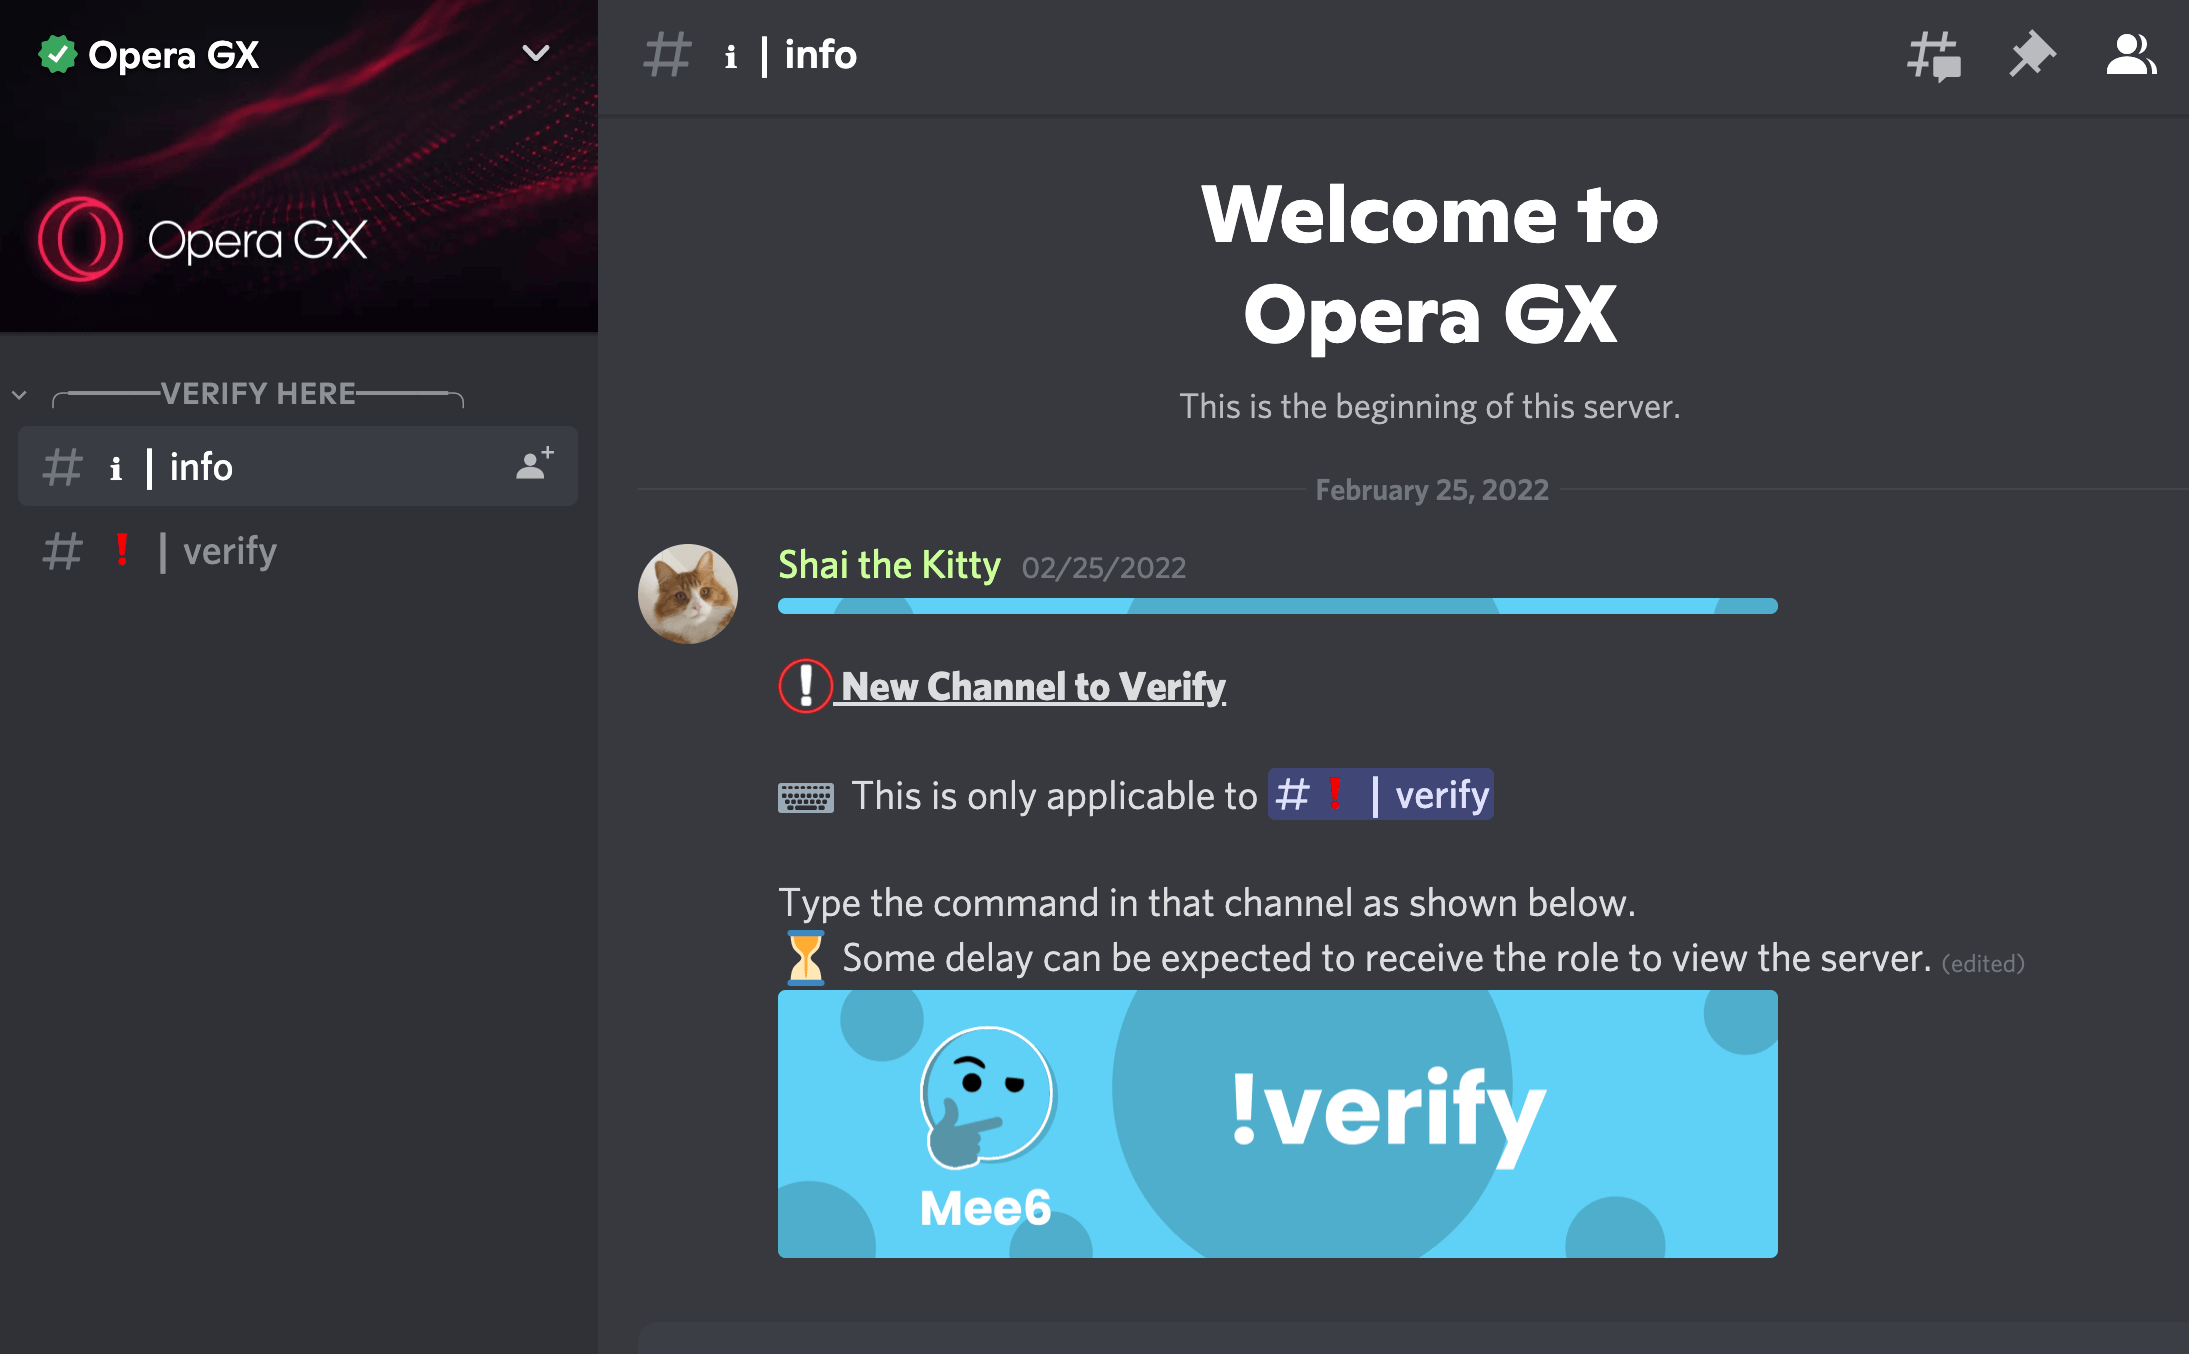 Discord - How to setup welcome screen in my discord server.